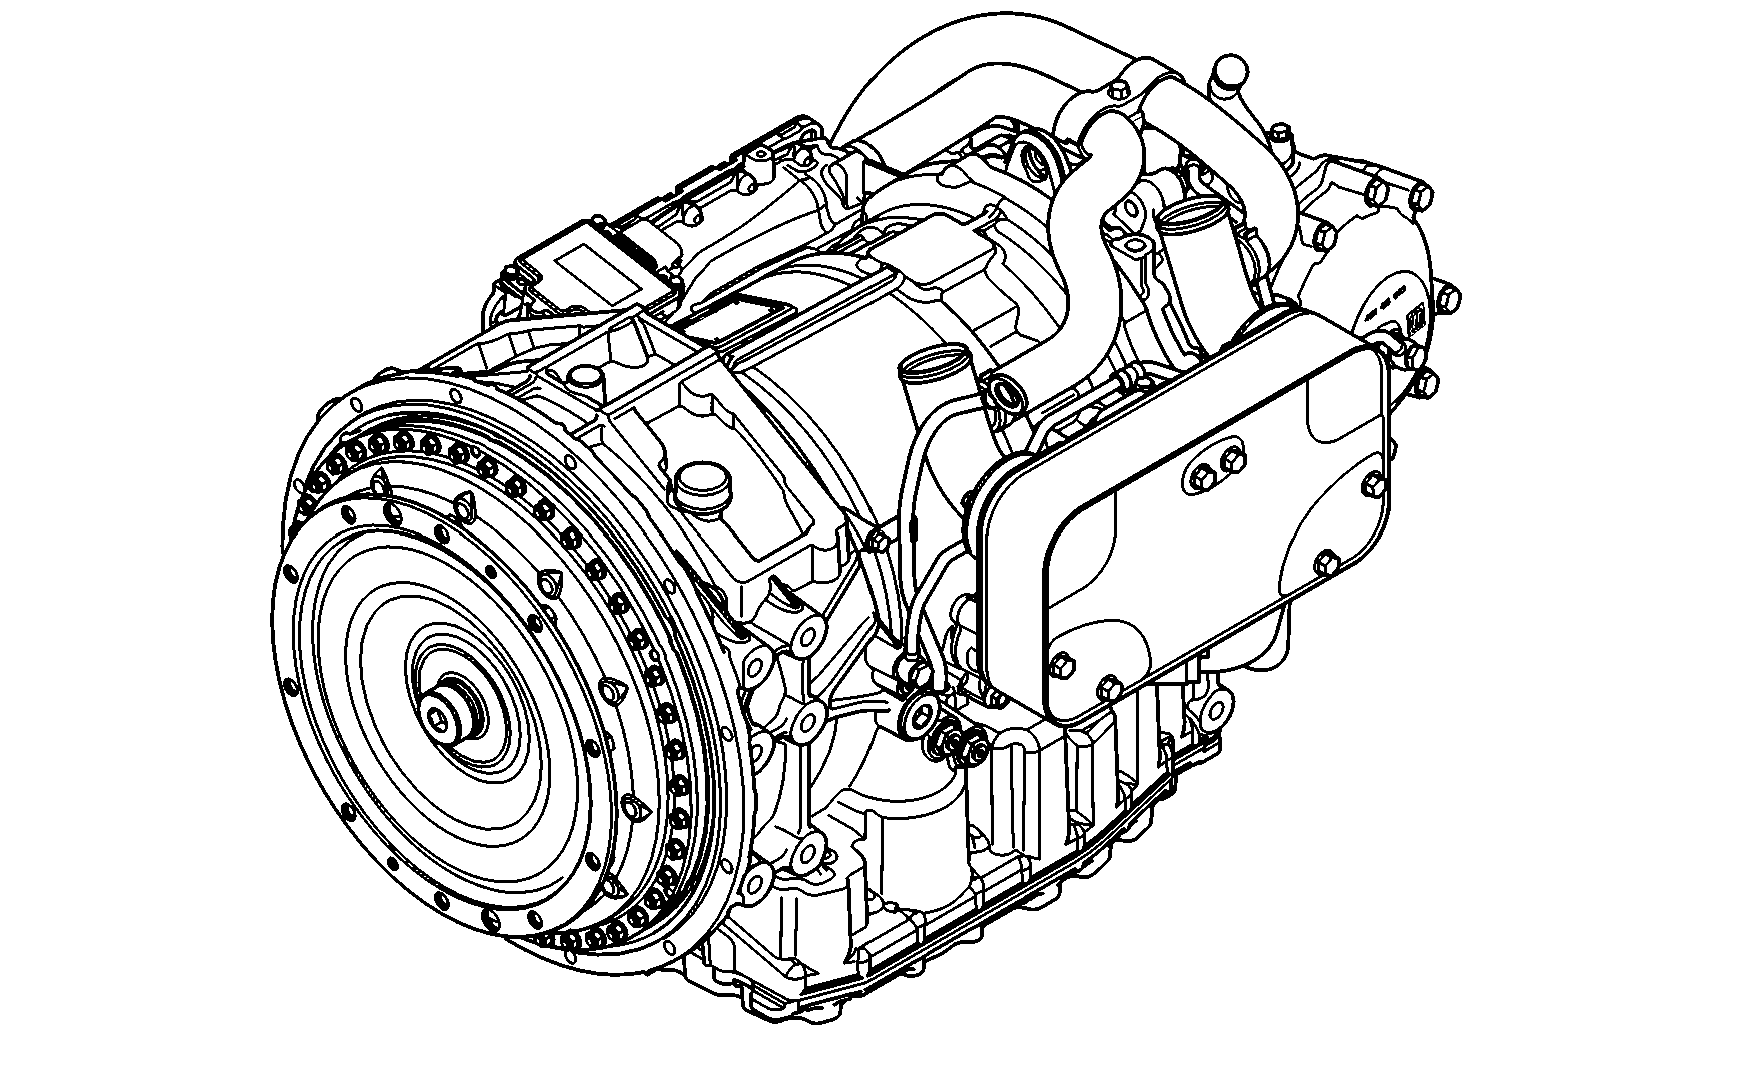 drawing for DENNIS SPECIAL VEHICLES 663627 - 6 AP 1203 B (figure 1)